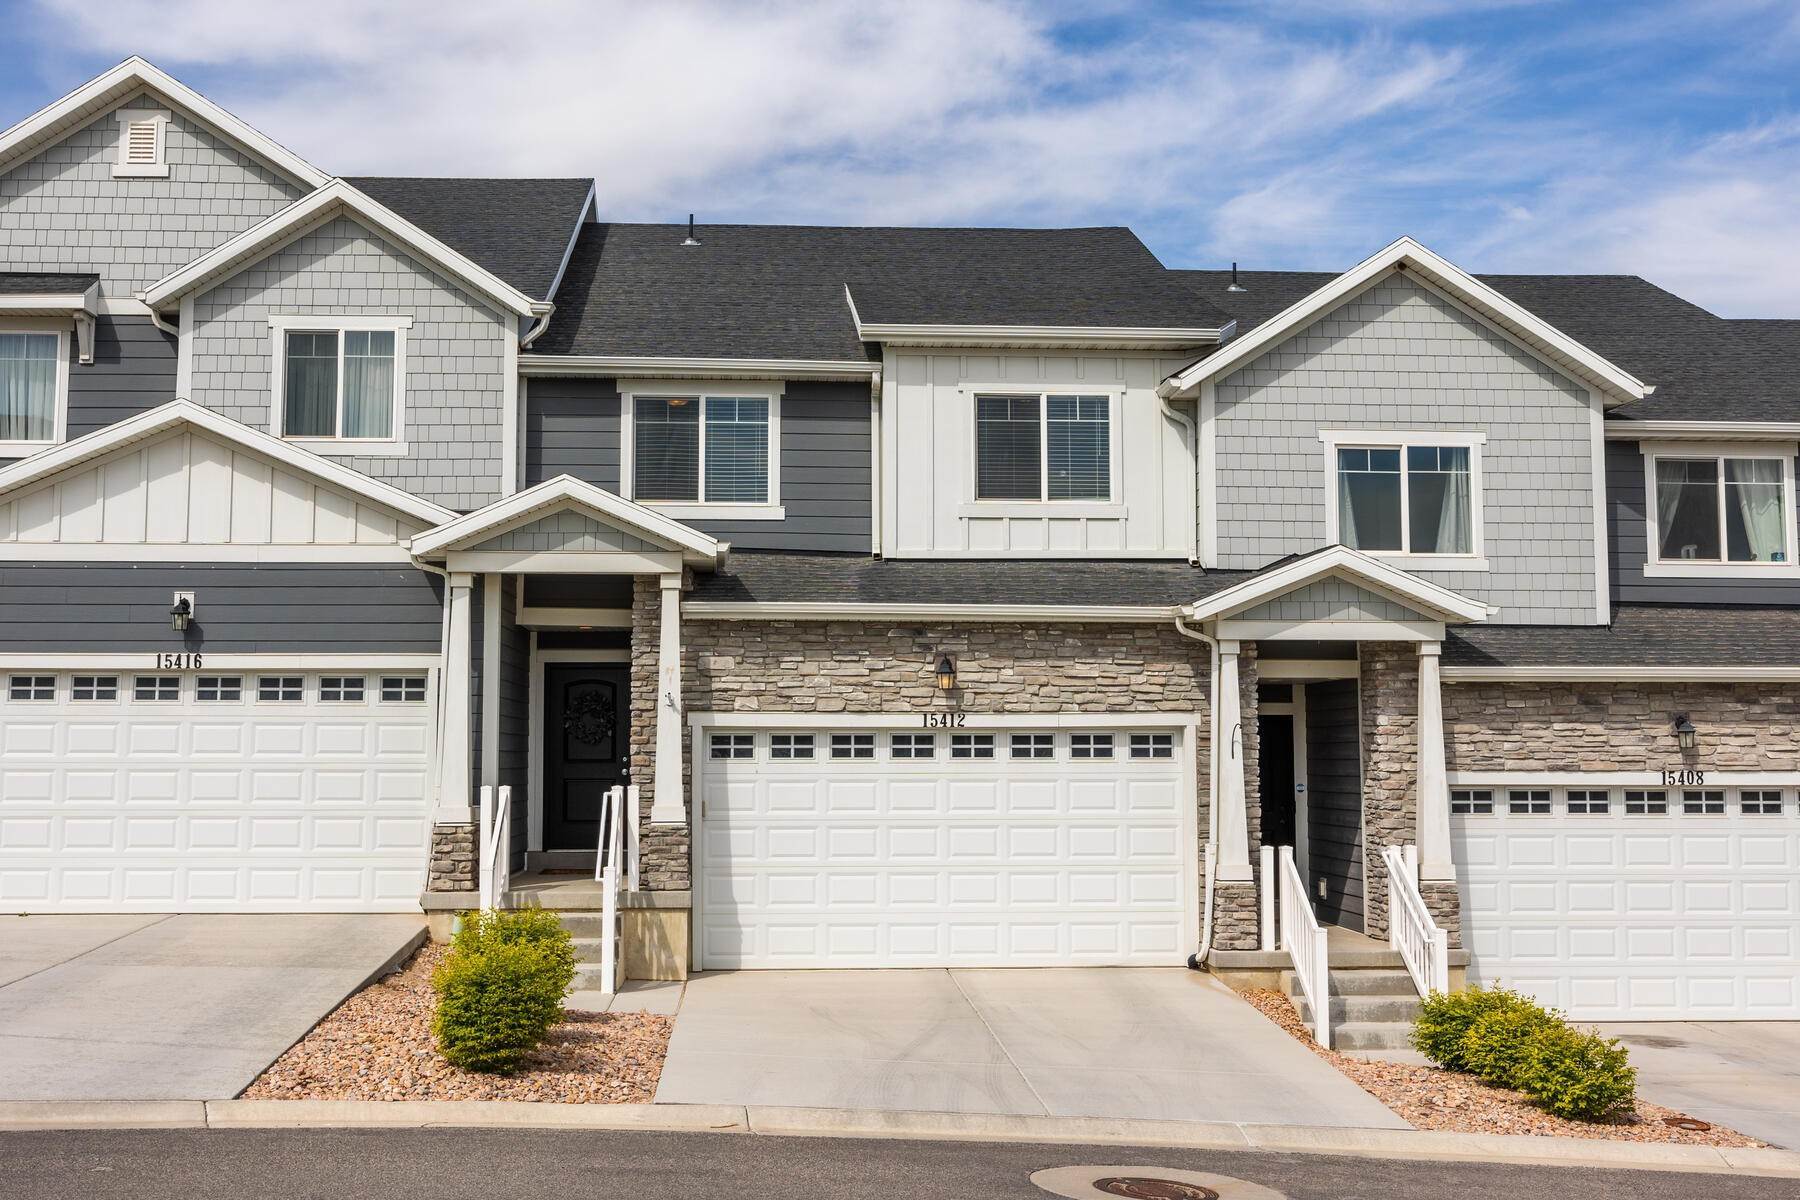 Townhouse for Sale at You Will Love Coming Home to This Like-New Bluffdale Home! 15412 Tarawa Drive Bluffdale, Utah 84065 United States